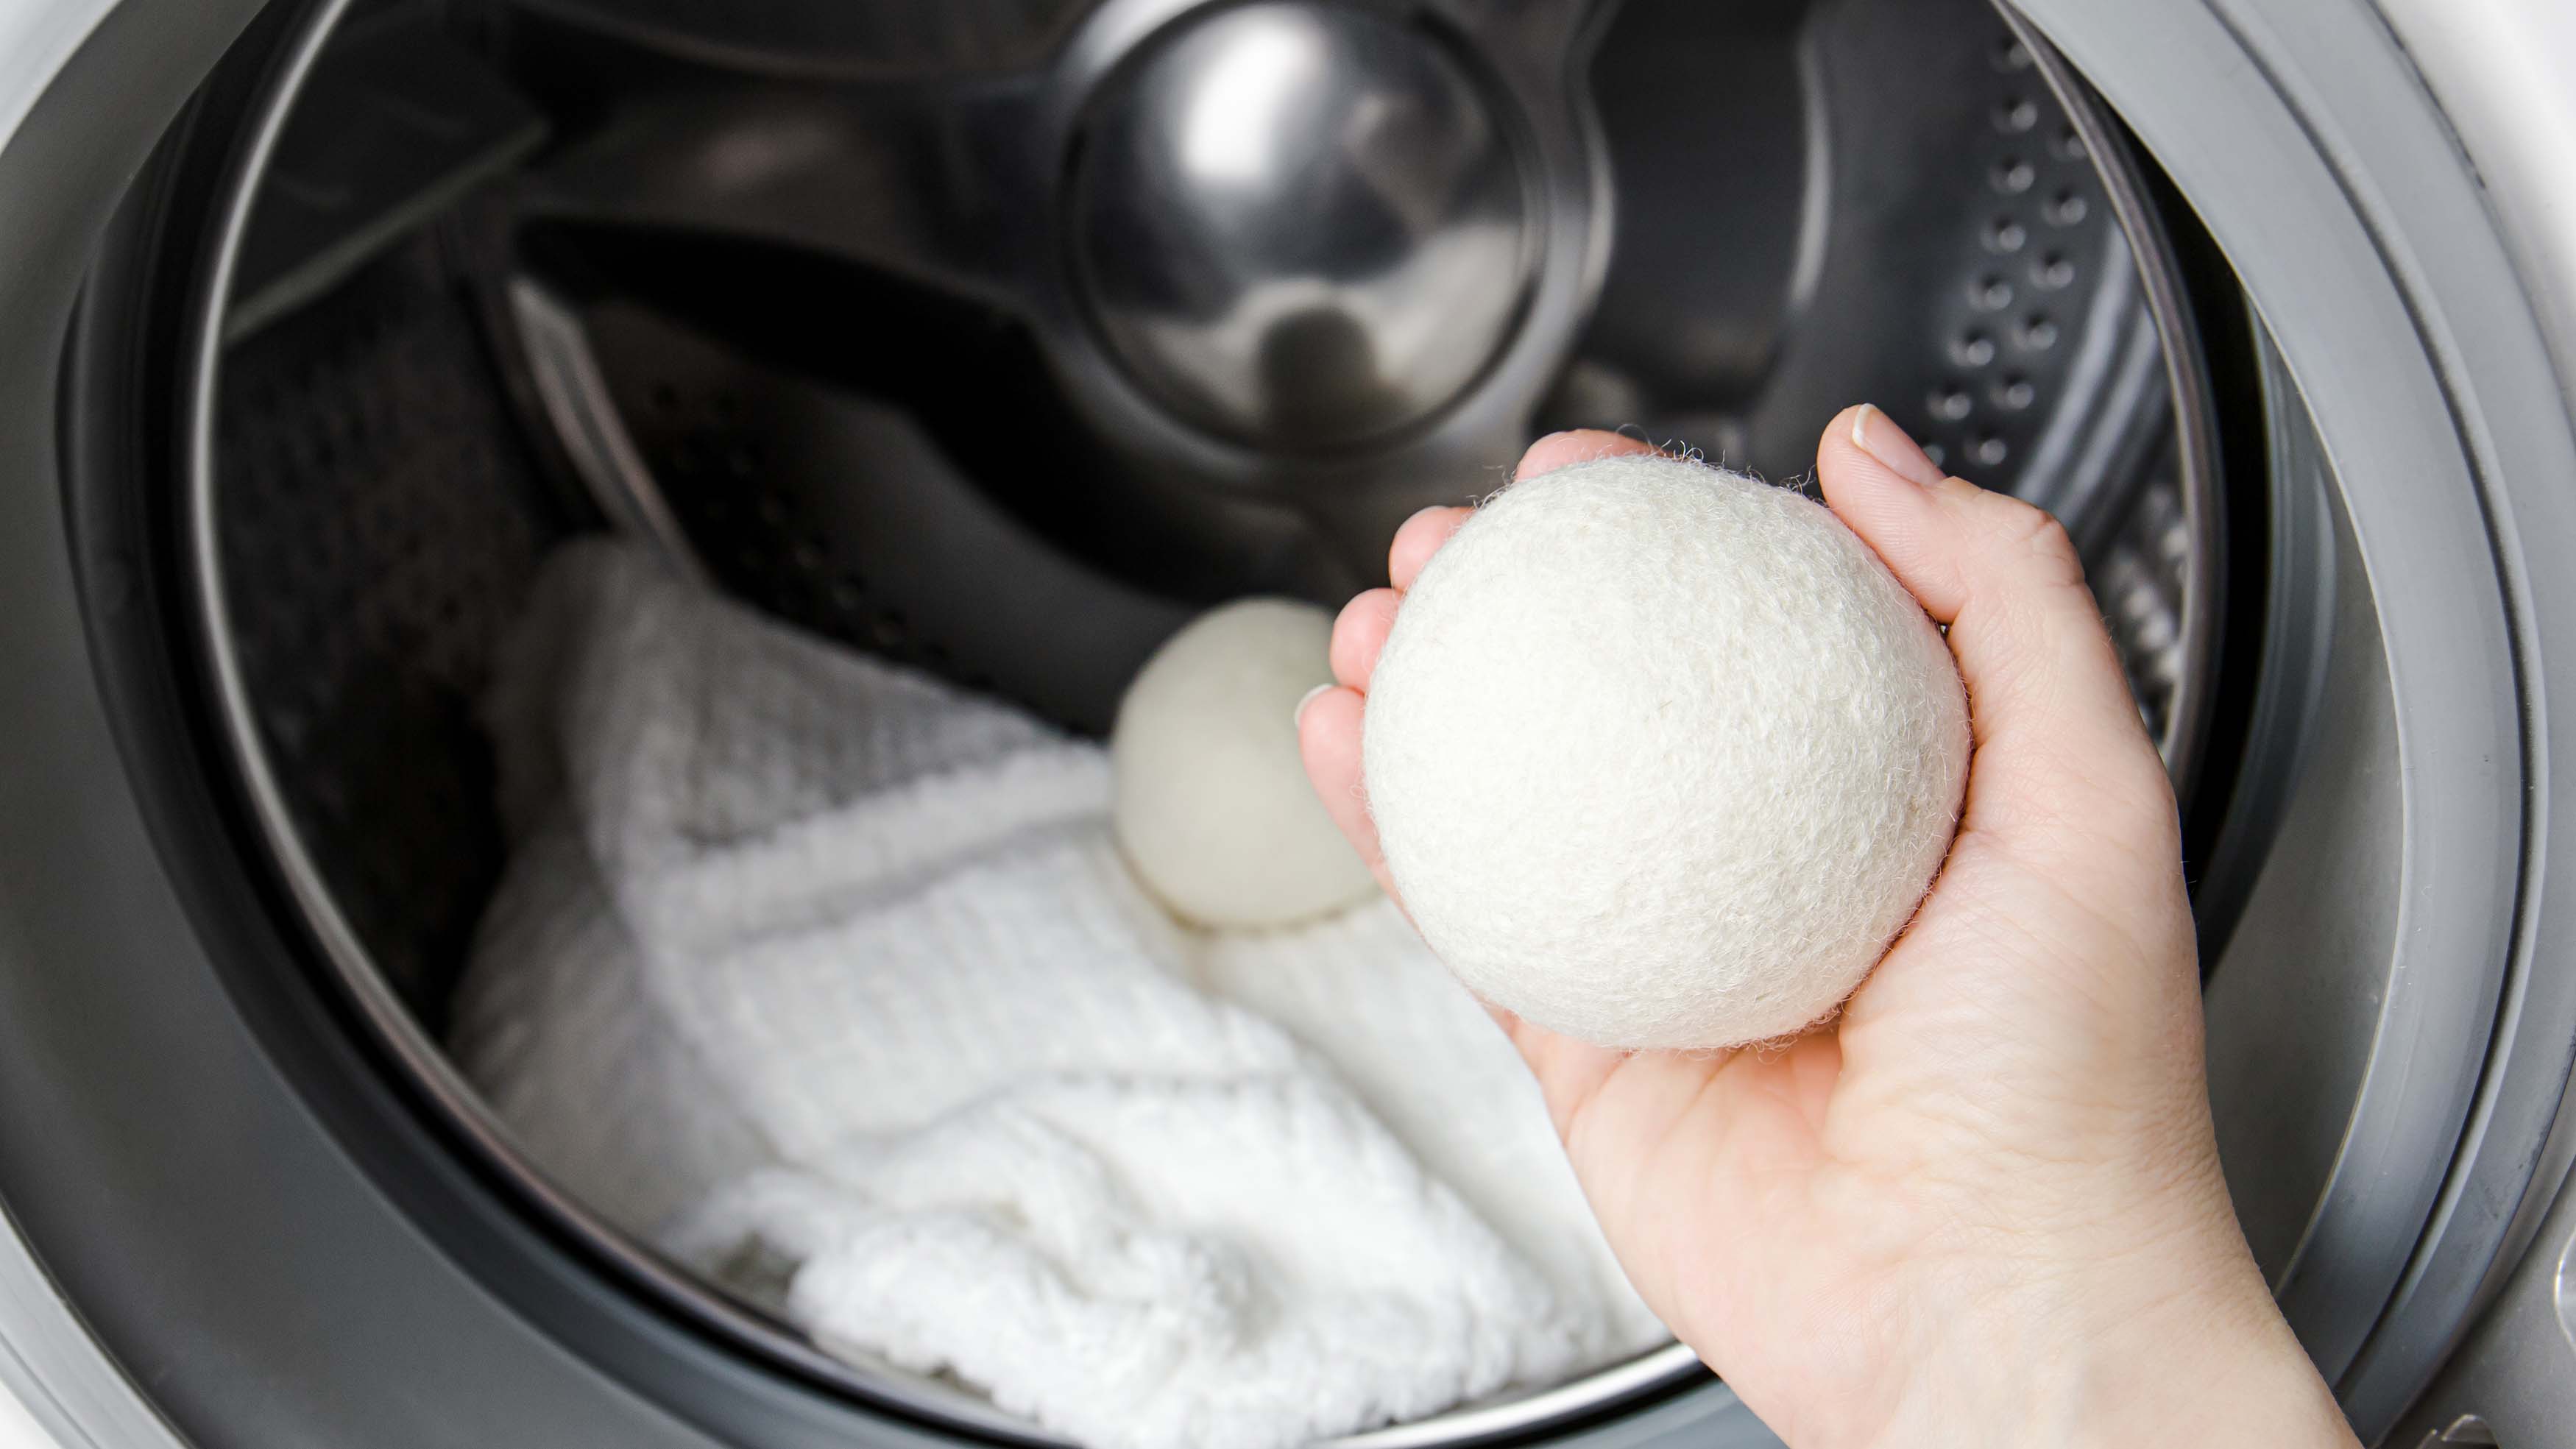 What To Use Instead Of Dryer Sheets, By Laundry Experts